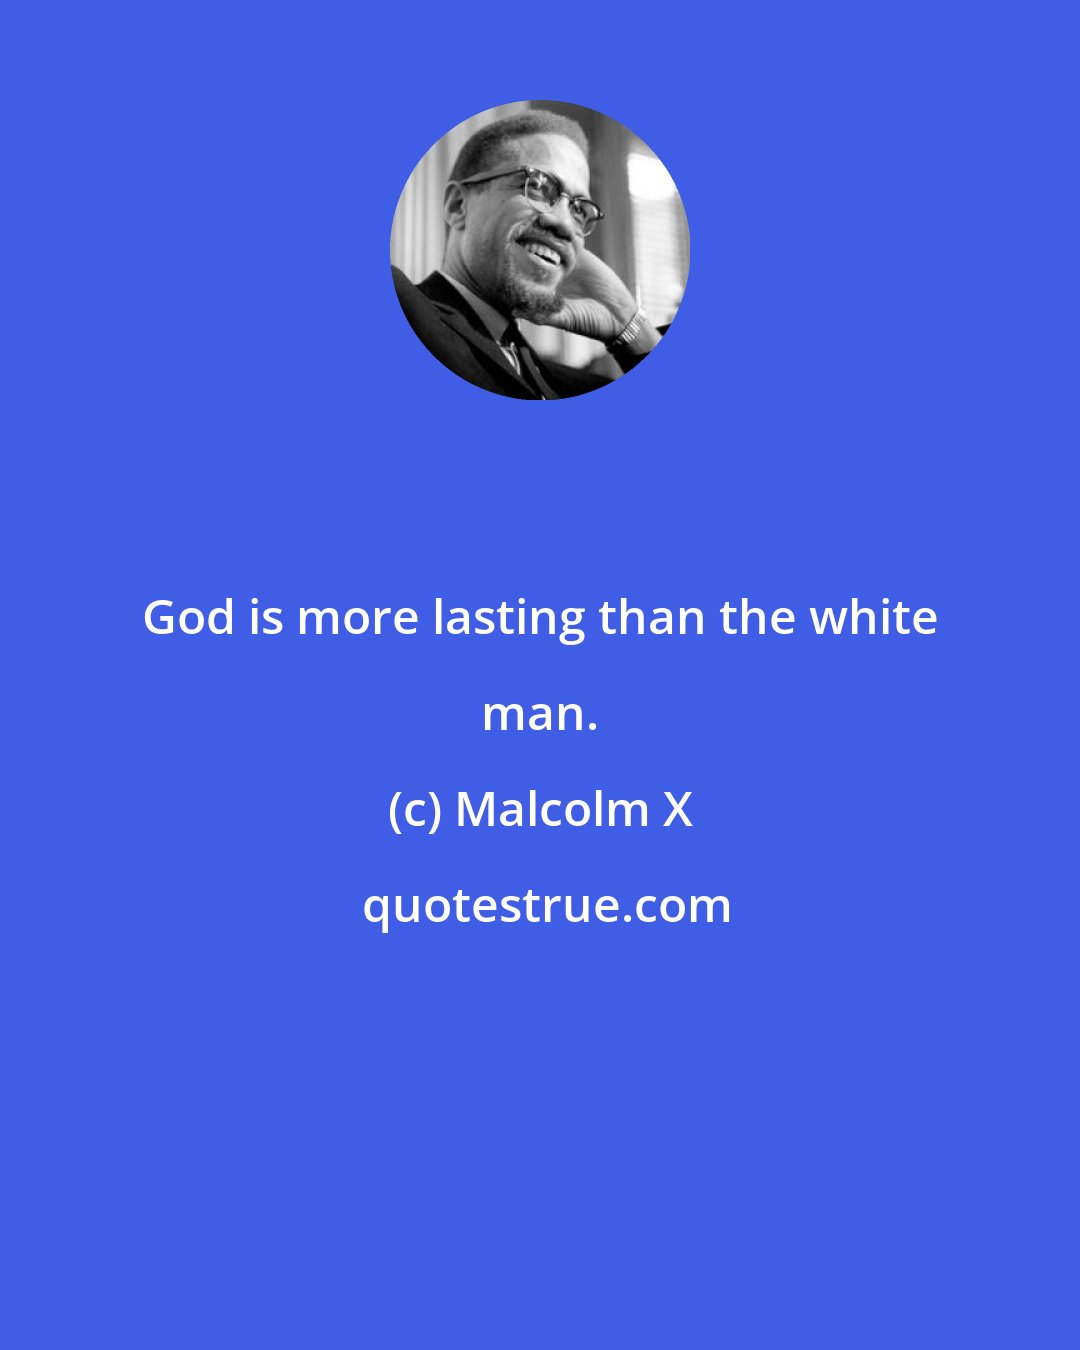 Malcolm X: God is more lasting than the white man.